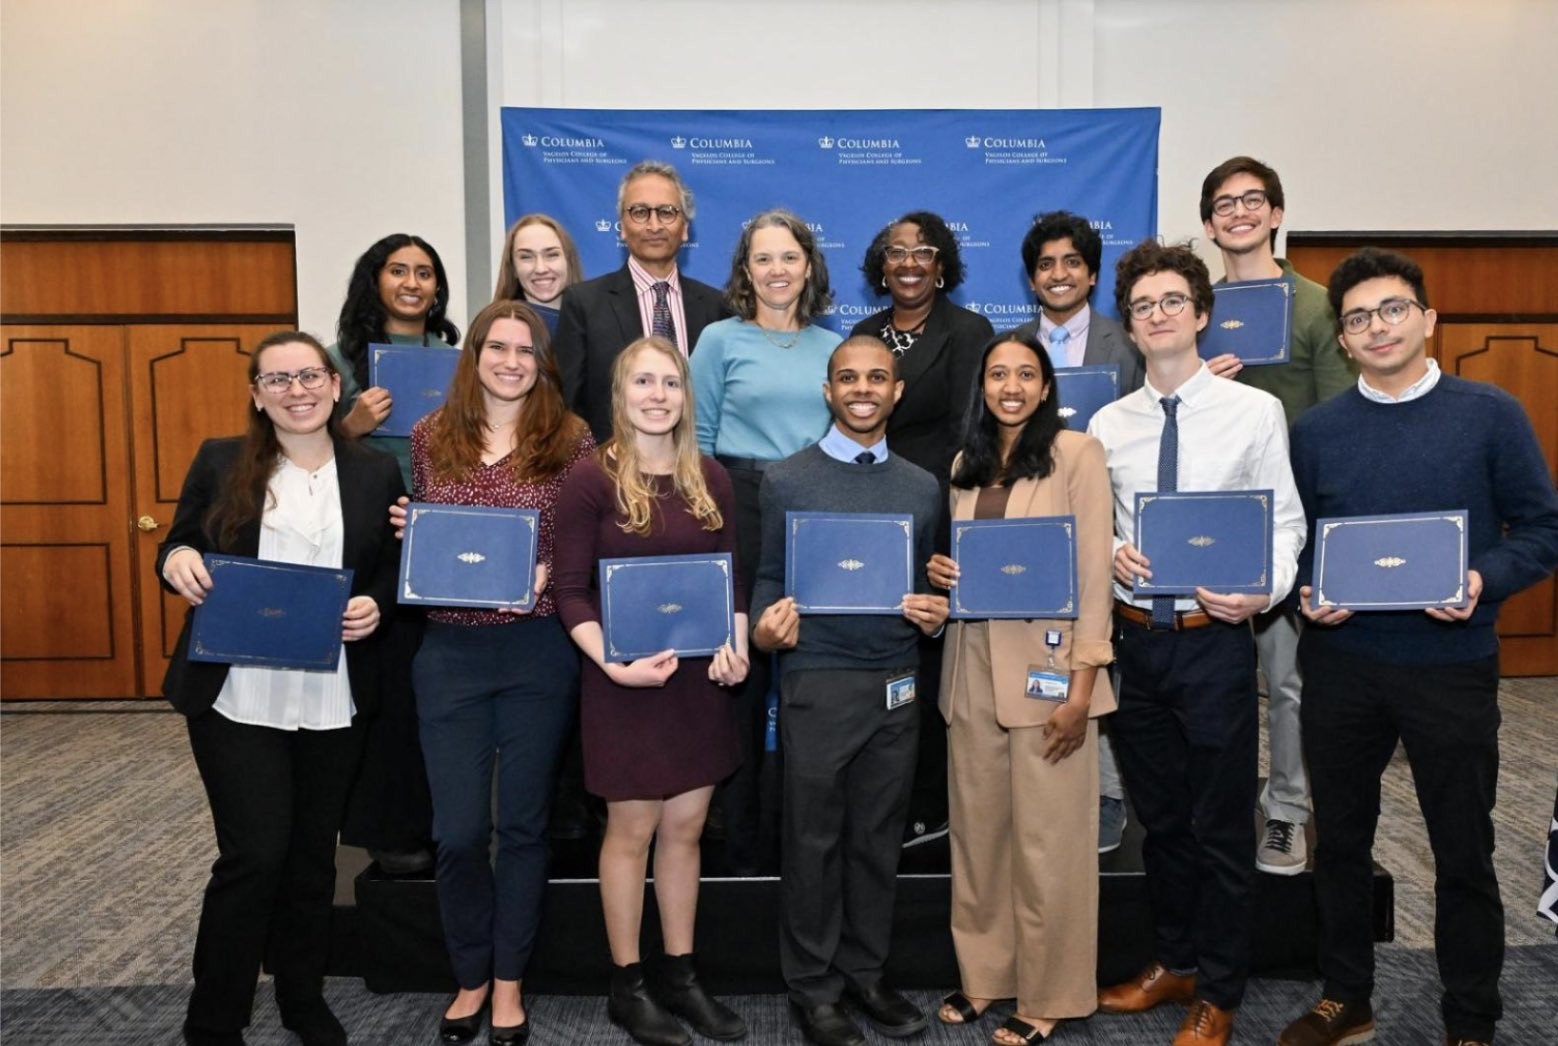 welve students, pictured here with medical school leaders, won awards at VP&S Student Research Day on April 3. Front row, from left: Amy Shteyman, Madison Heath, Aleksandra Recupero, Paul Lewis, Meghana Giri, William Britton, Guillermo Almodovar Cruz. Back row, from left: Kavya Rajesh, Alice Vinogradsky, Anil Lalwani, Katrina Armstrong, Monica Lypson, Prashanth Kumar, Frederick Lang. Not pictured: Damian Teasley. Photo by Diane Bondareff.